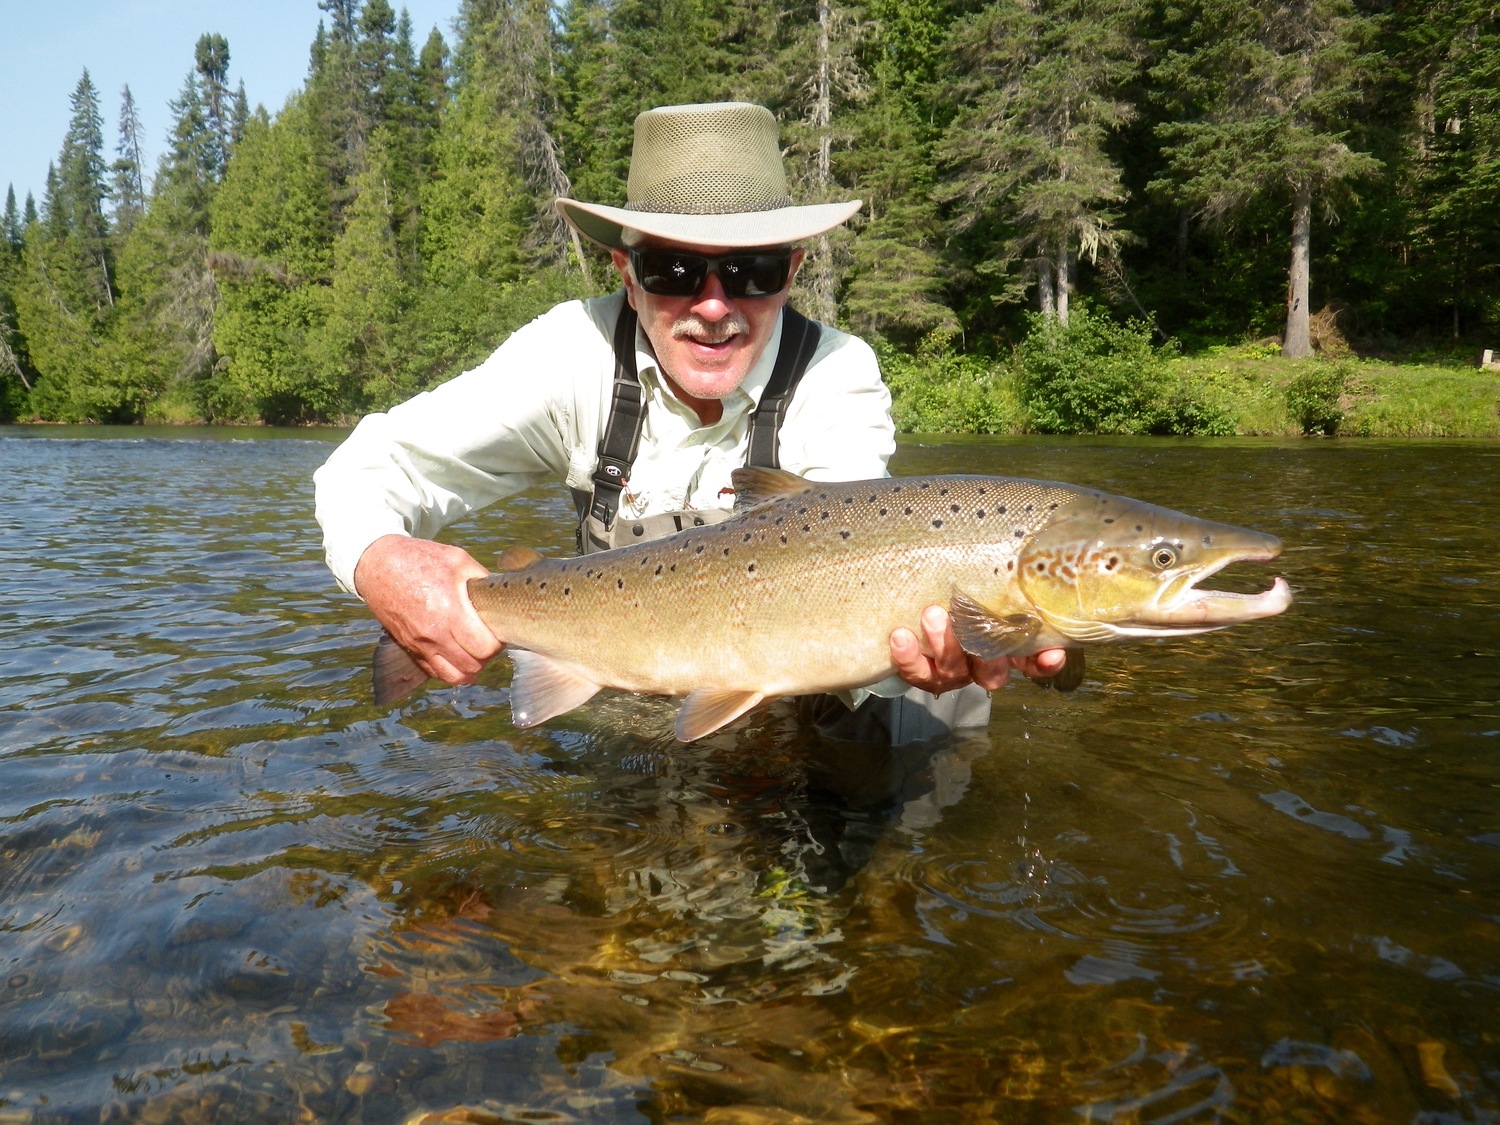 Salmon Lodge Fishing Report Nice shot and nice fish congratulations we are so glad you loved the trip.